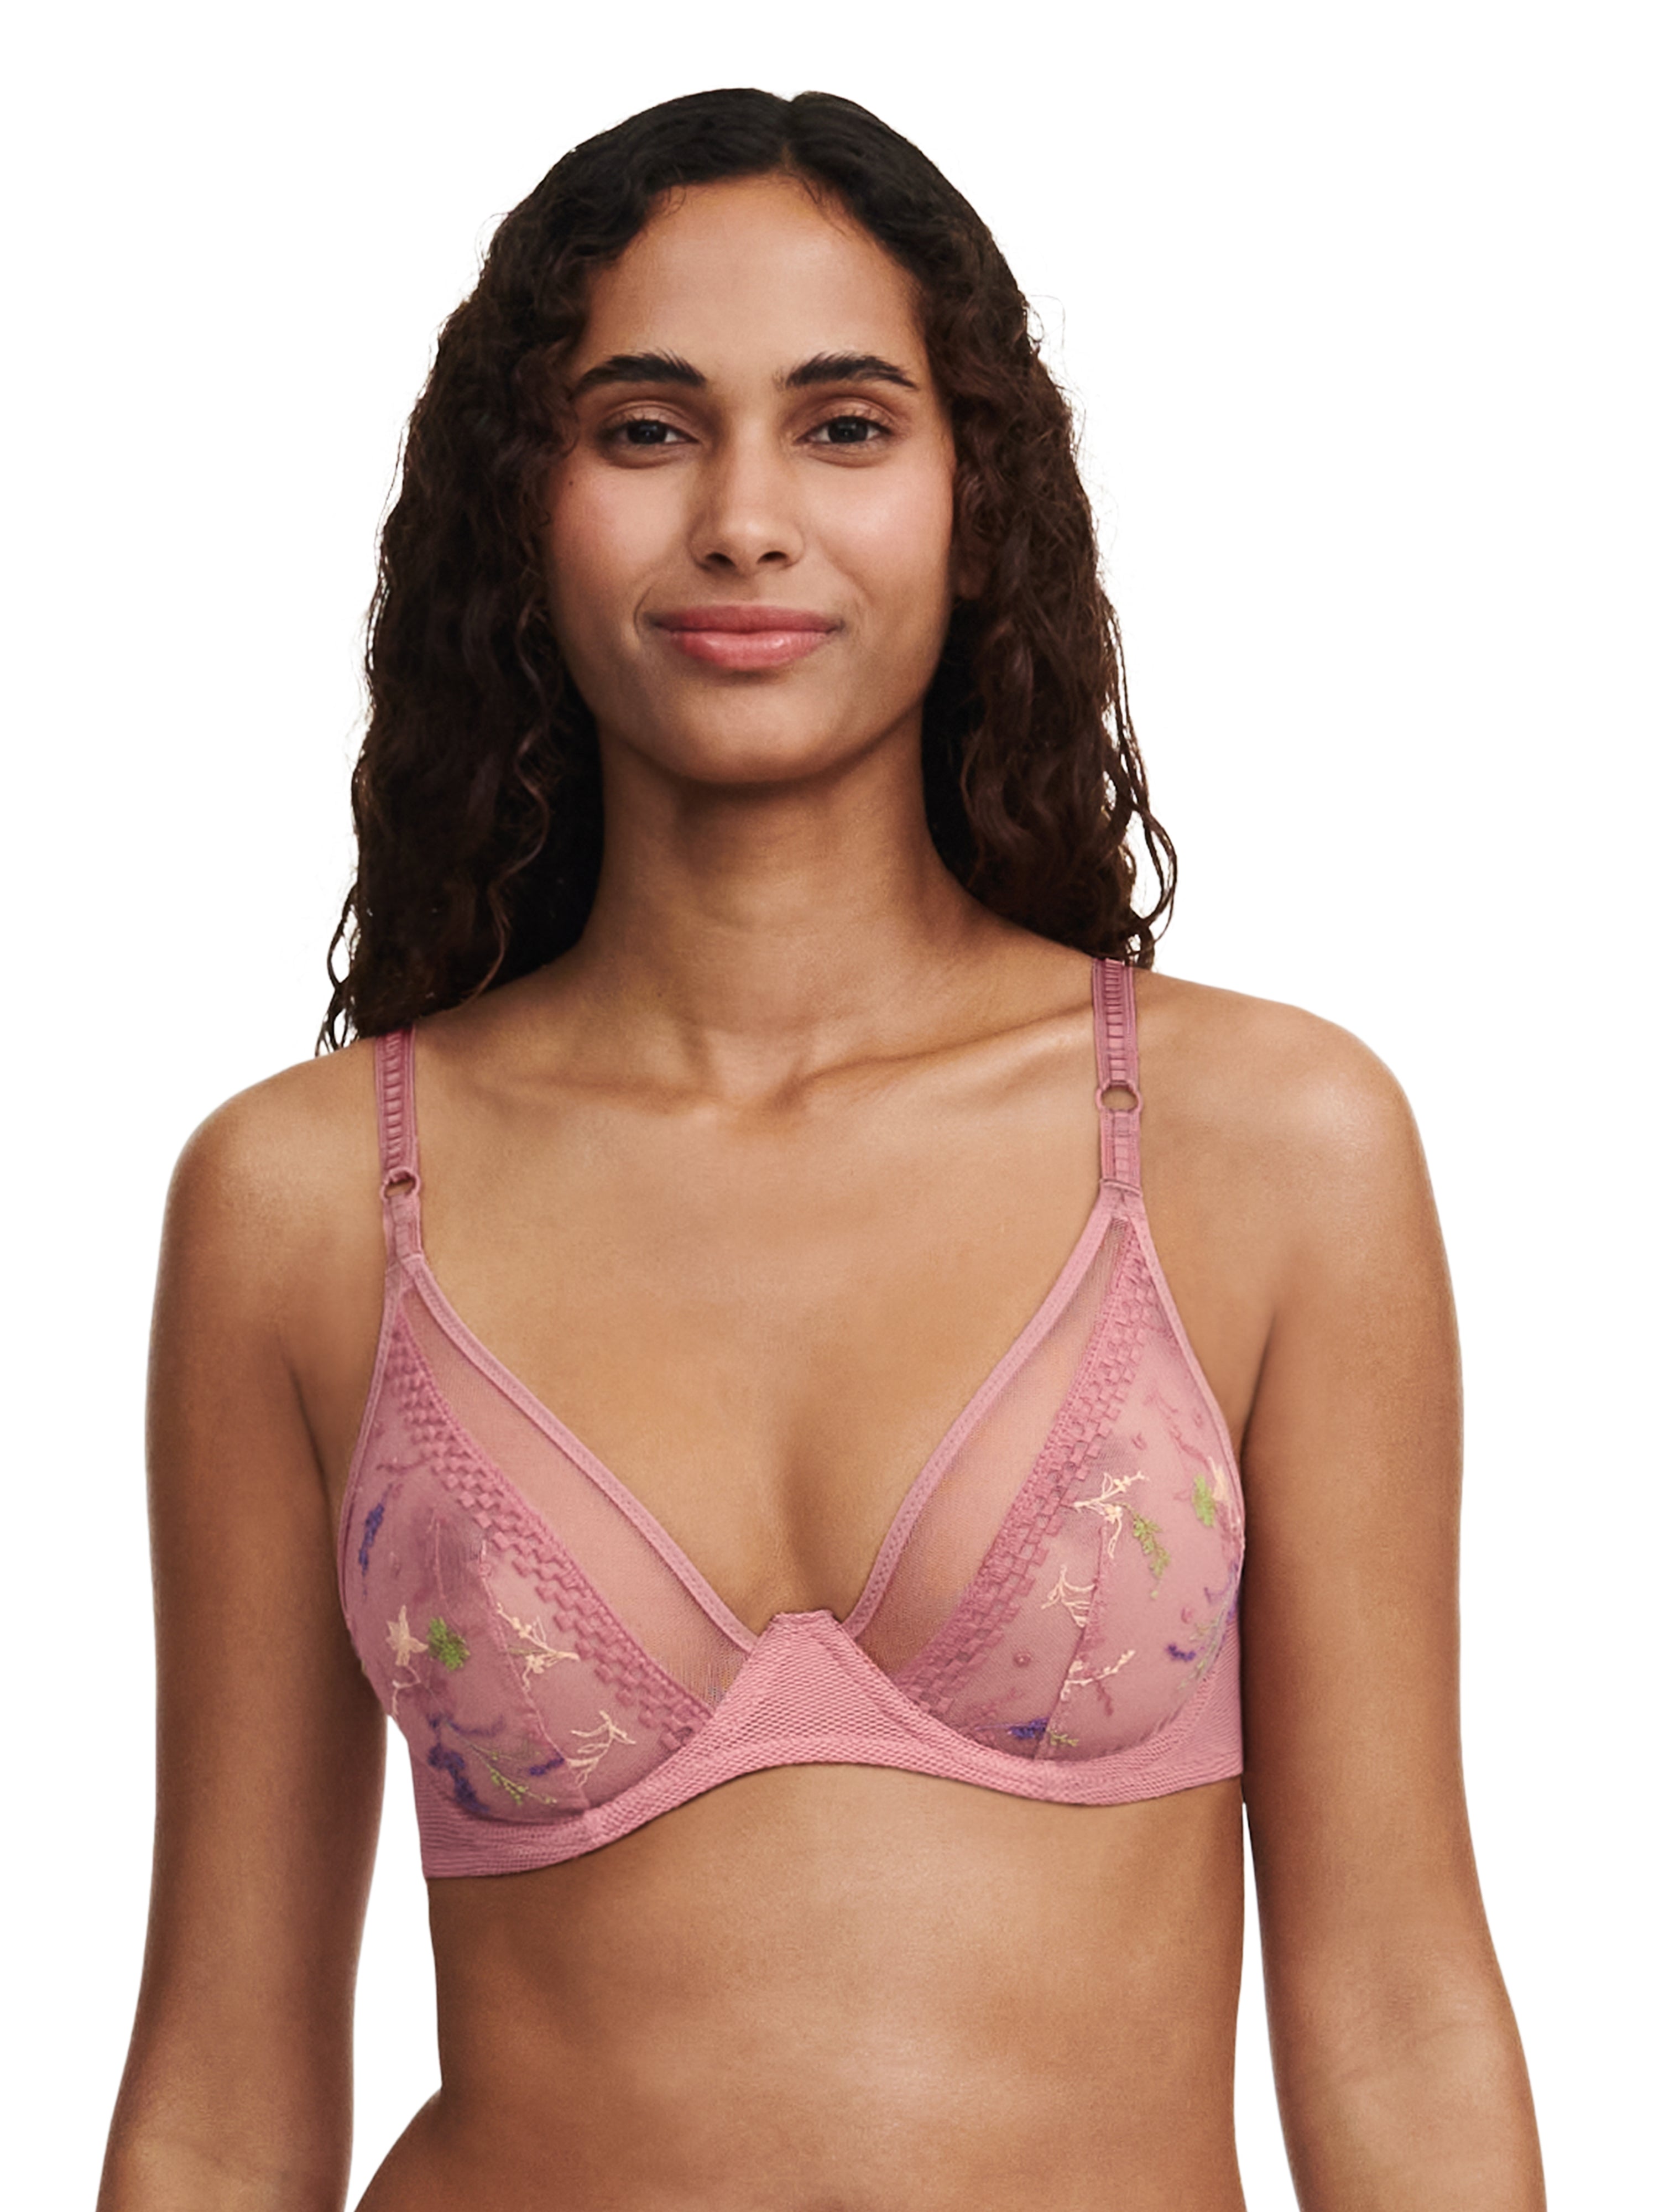 PINK - Victoria's Secret lace bra Size 34 C - $20 - From suzy